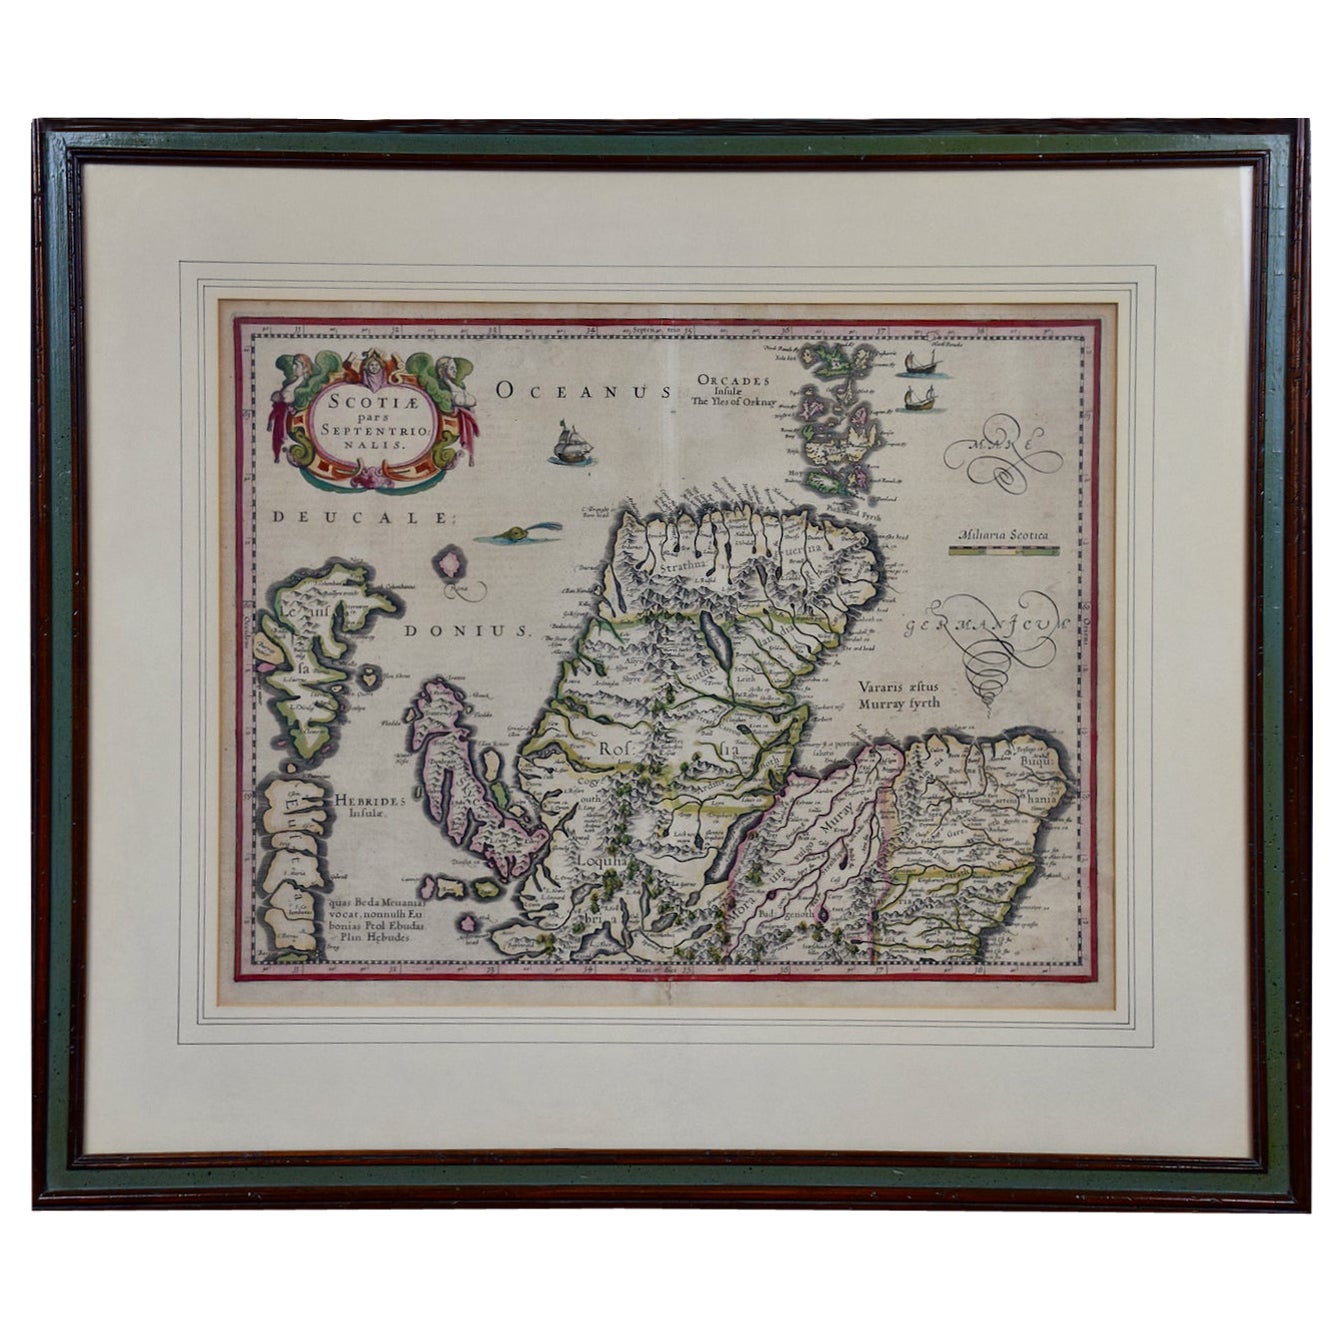 Northern Scotland: A 17th Century Hand-colored Map by Mercator